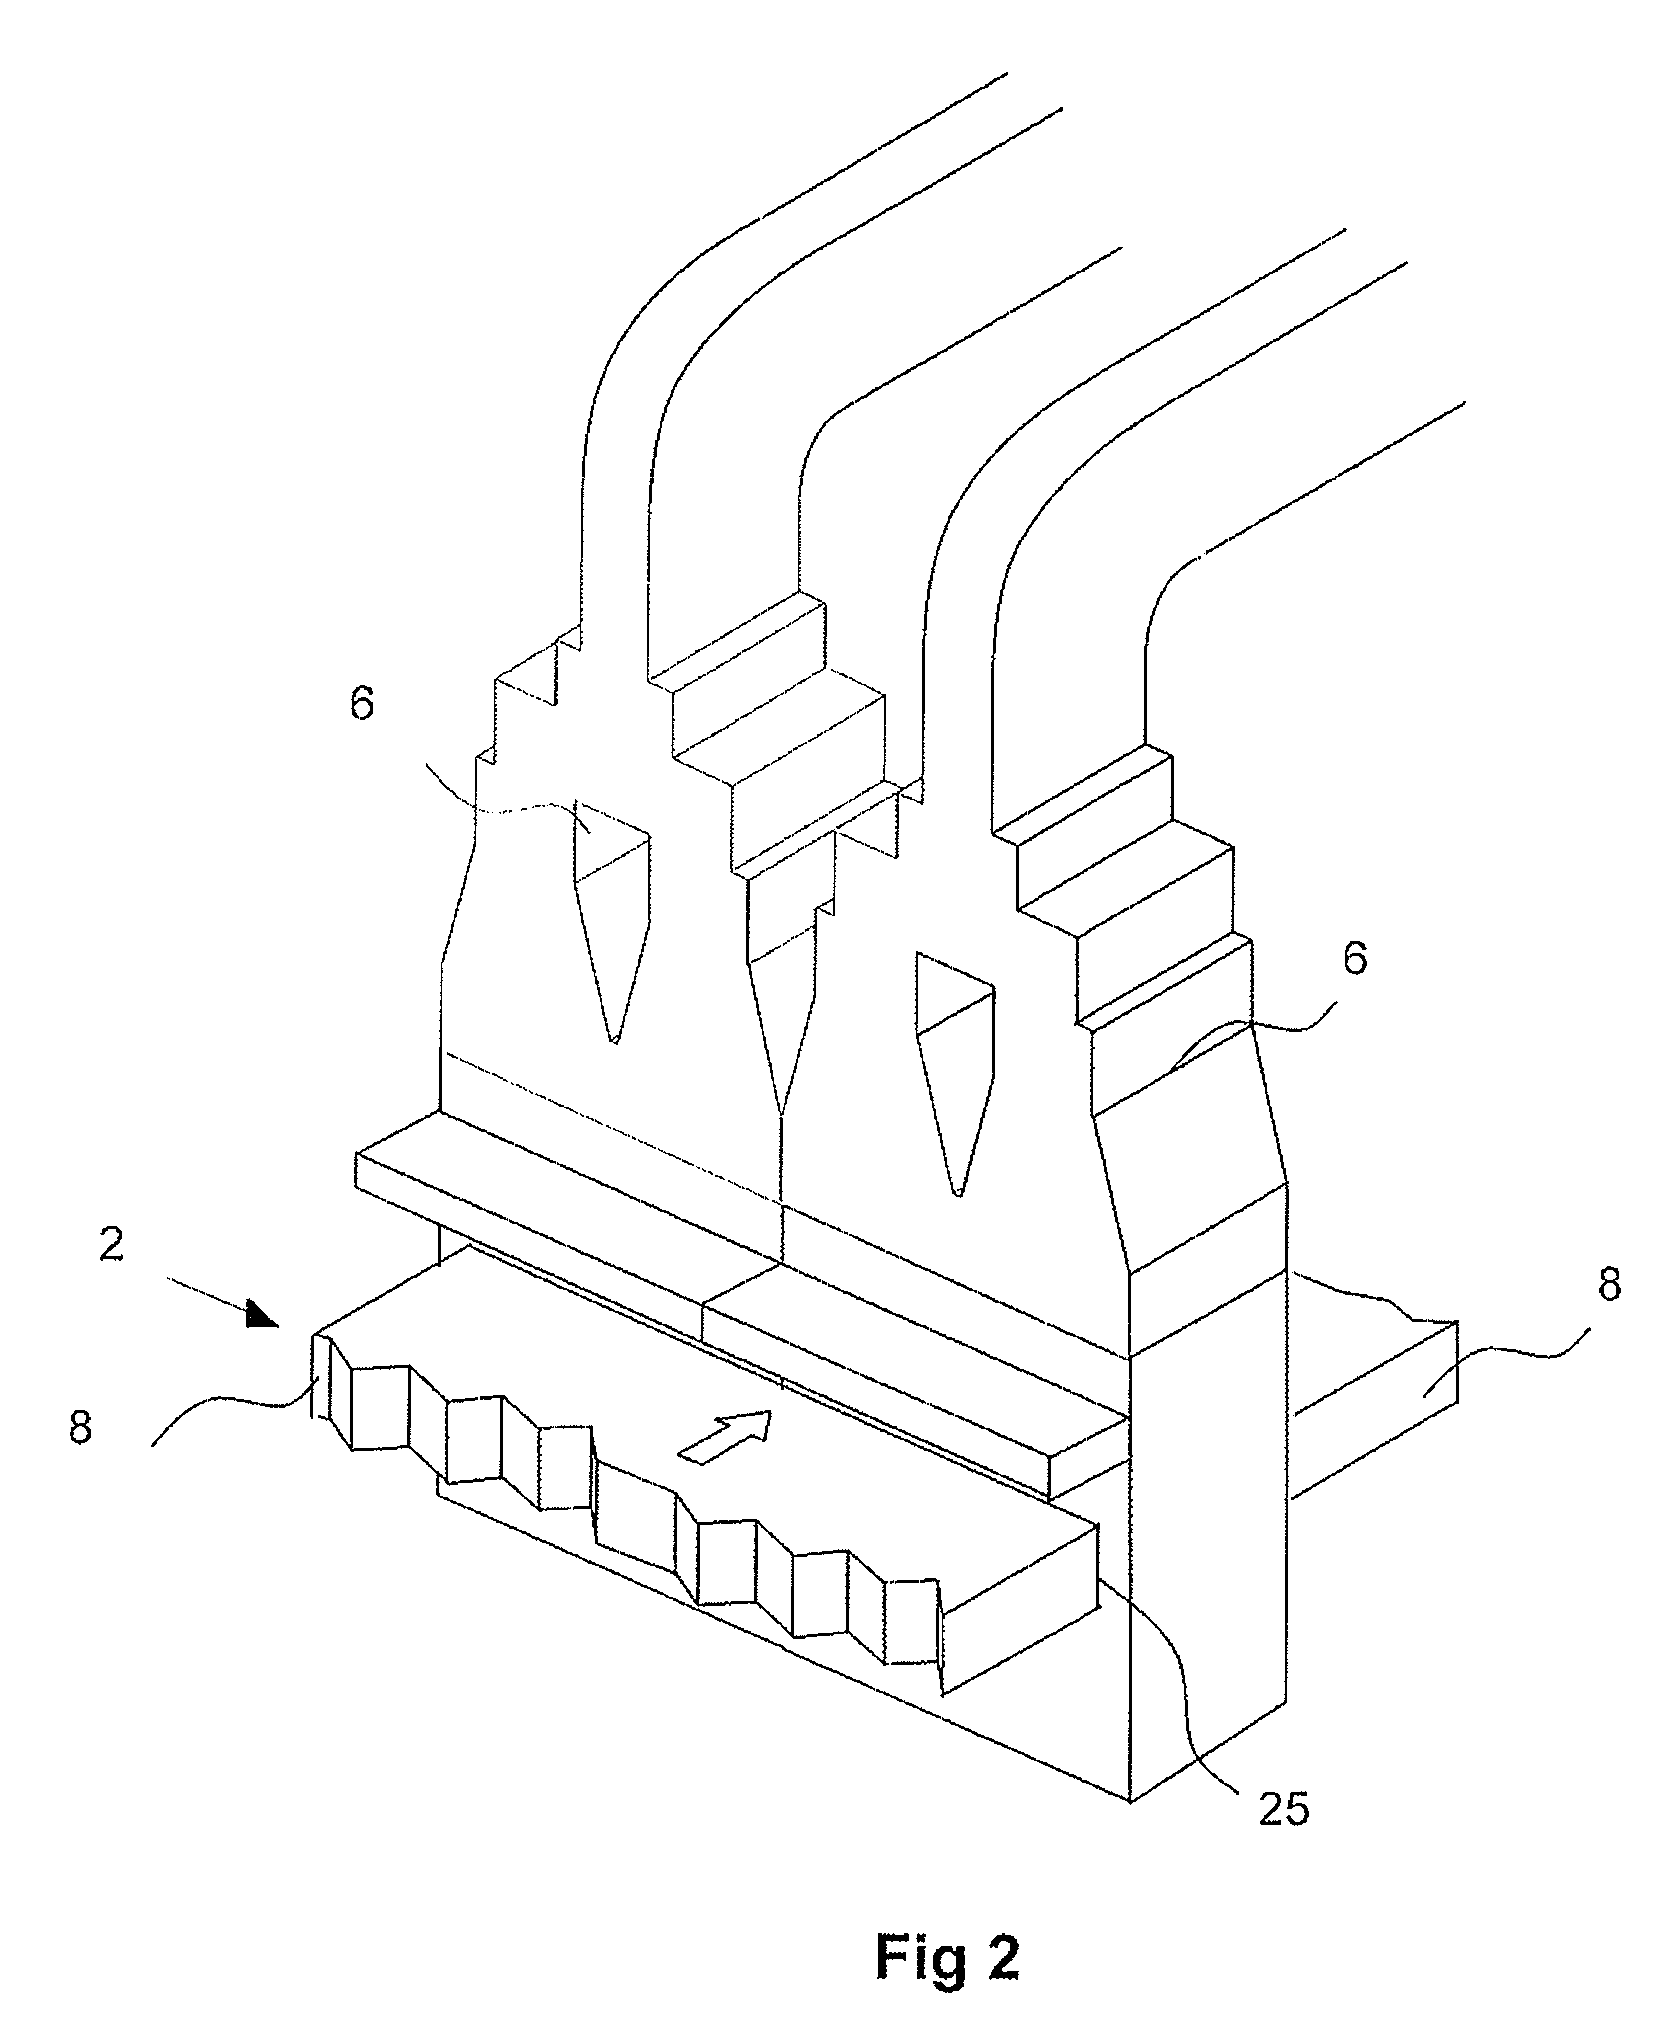 Apparatus for microwave heating of a planar product including a multi-segment waveguide element